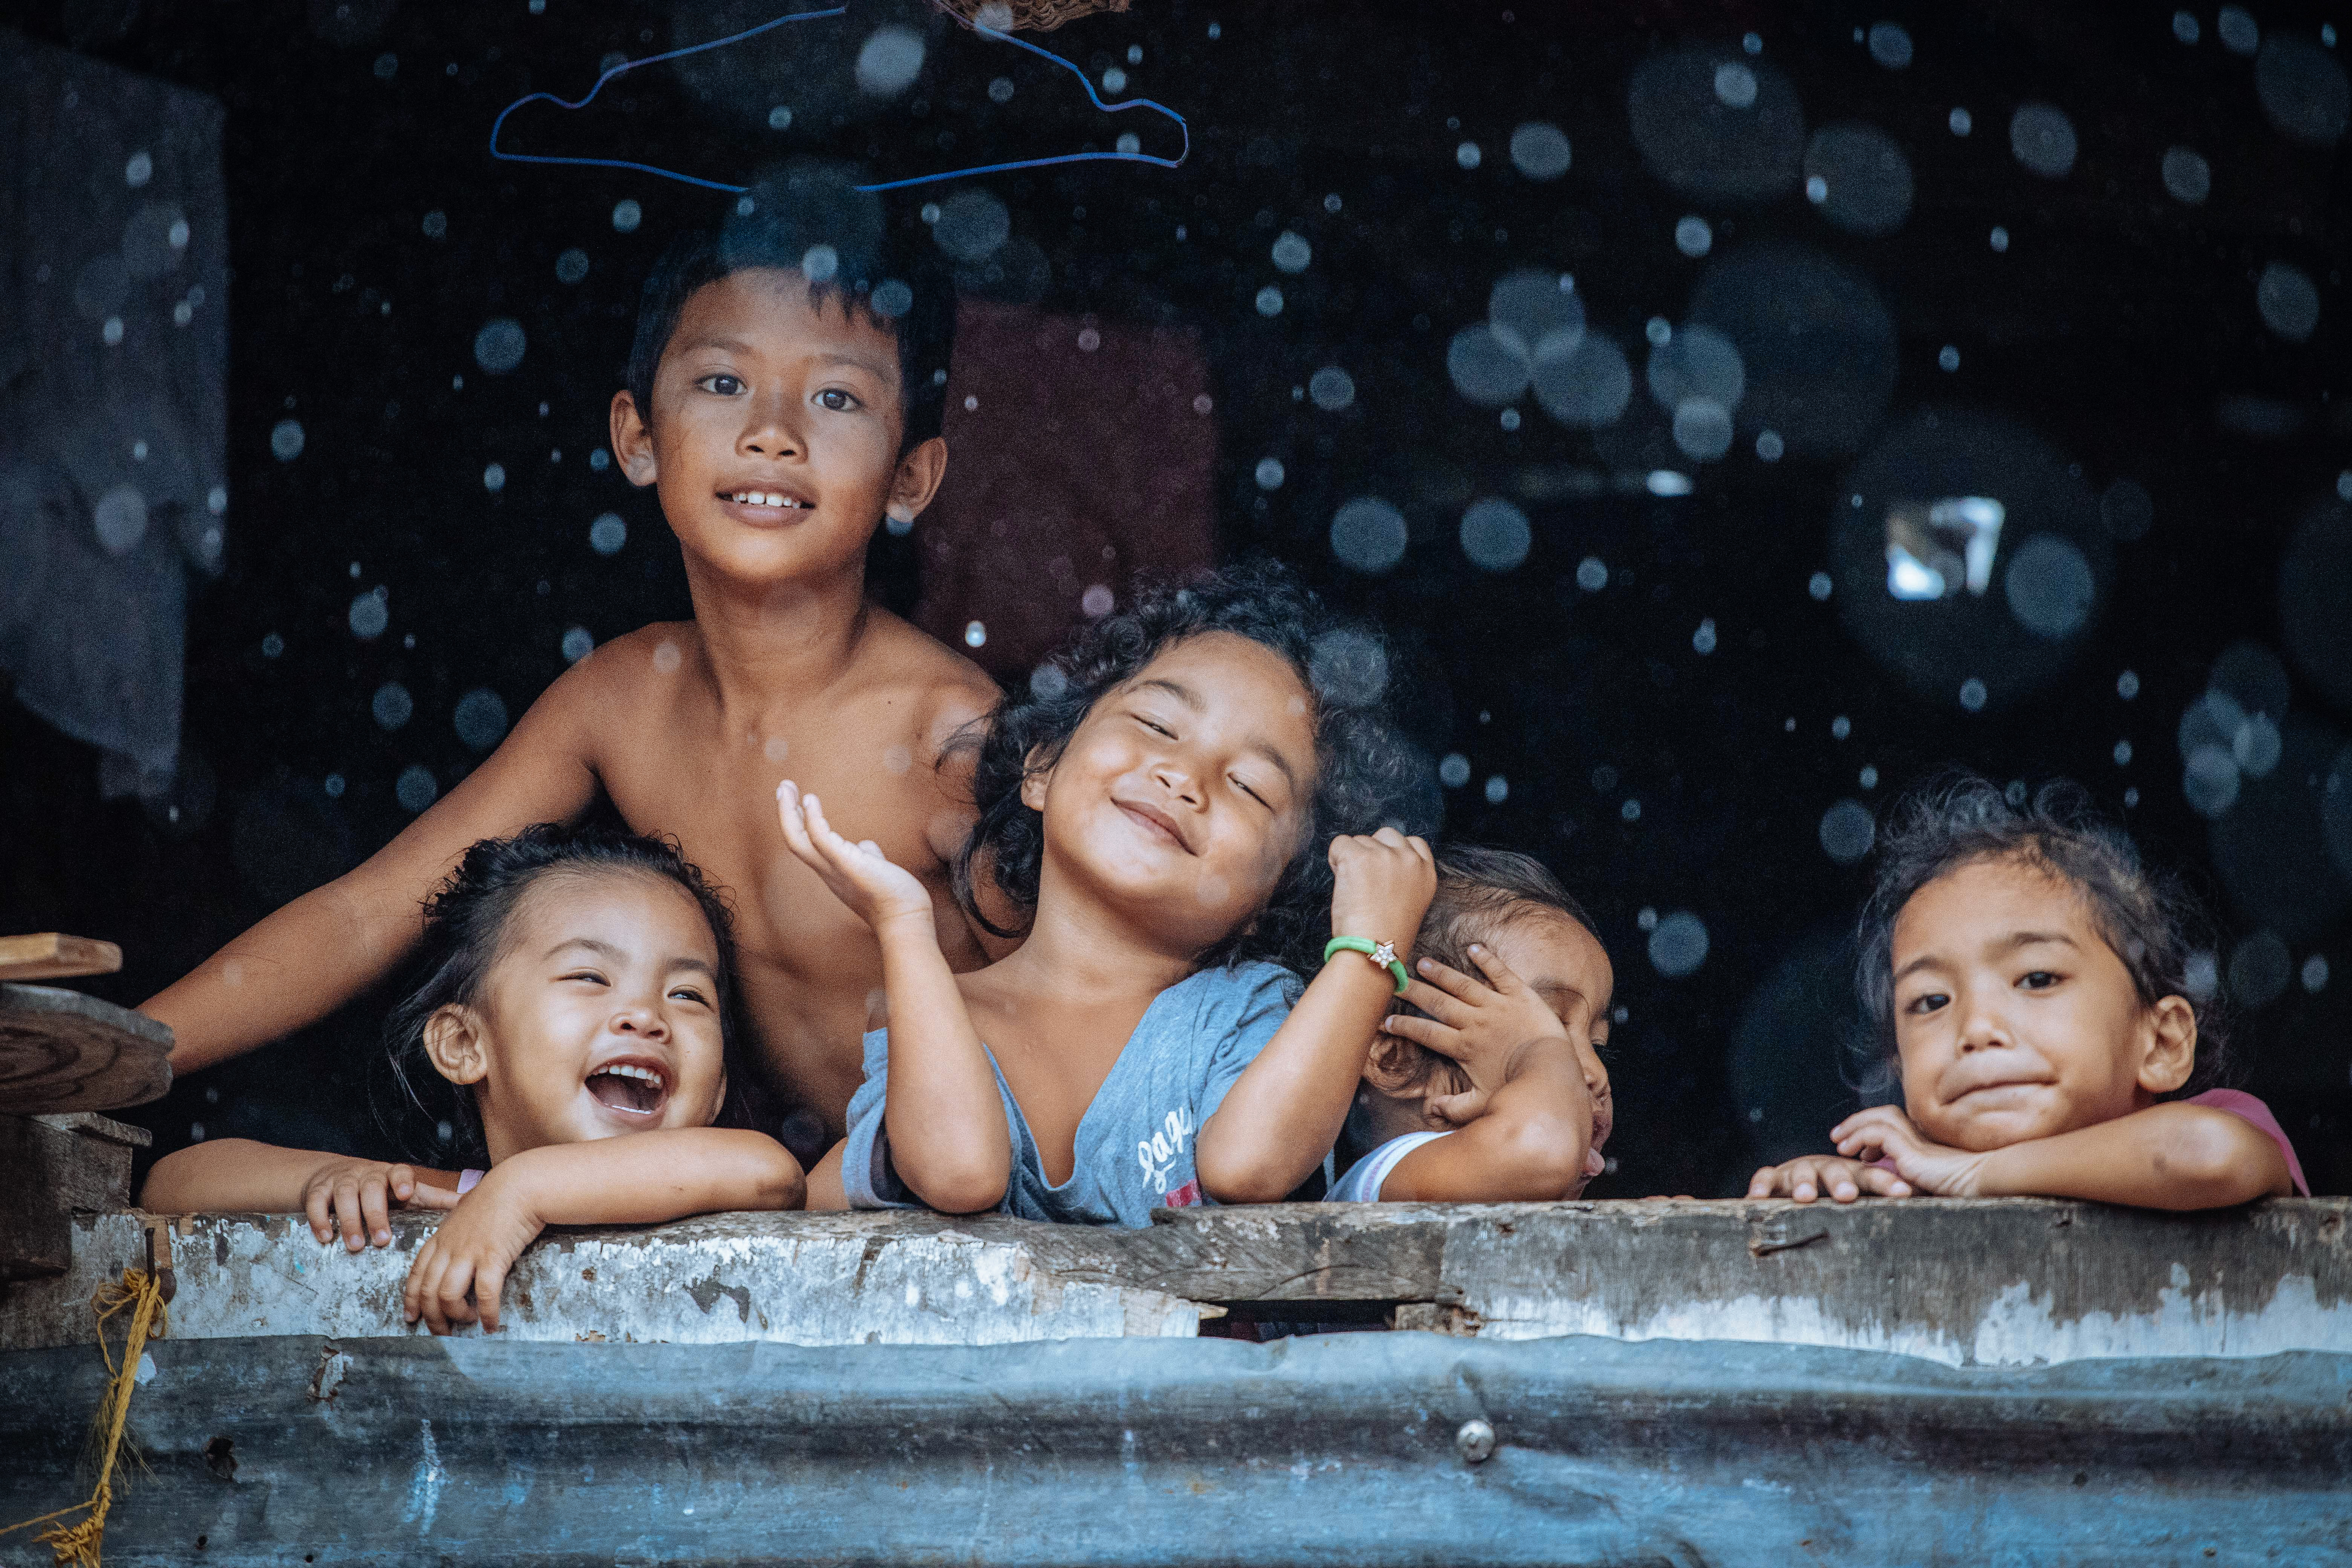 A group of young children in the Philippines smiling and laughing, captured by Hartmut Schwartzbach from Germany